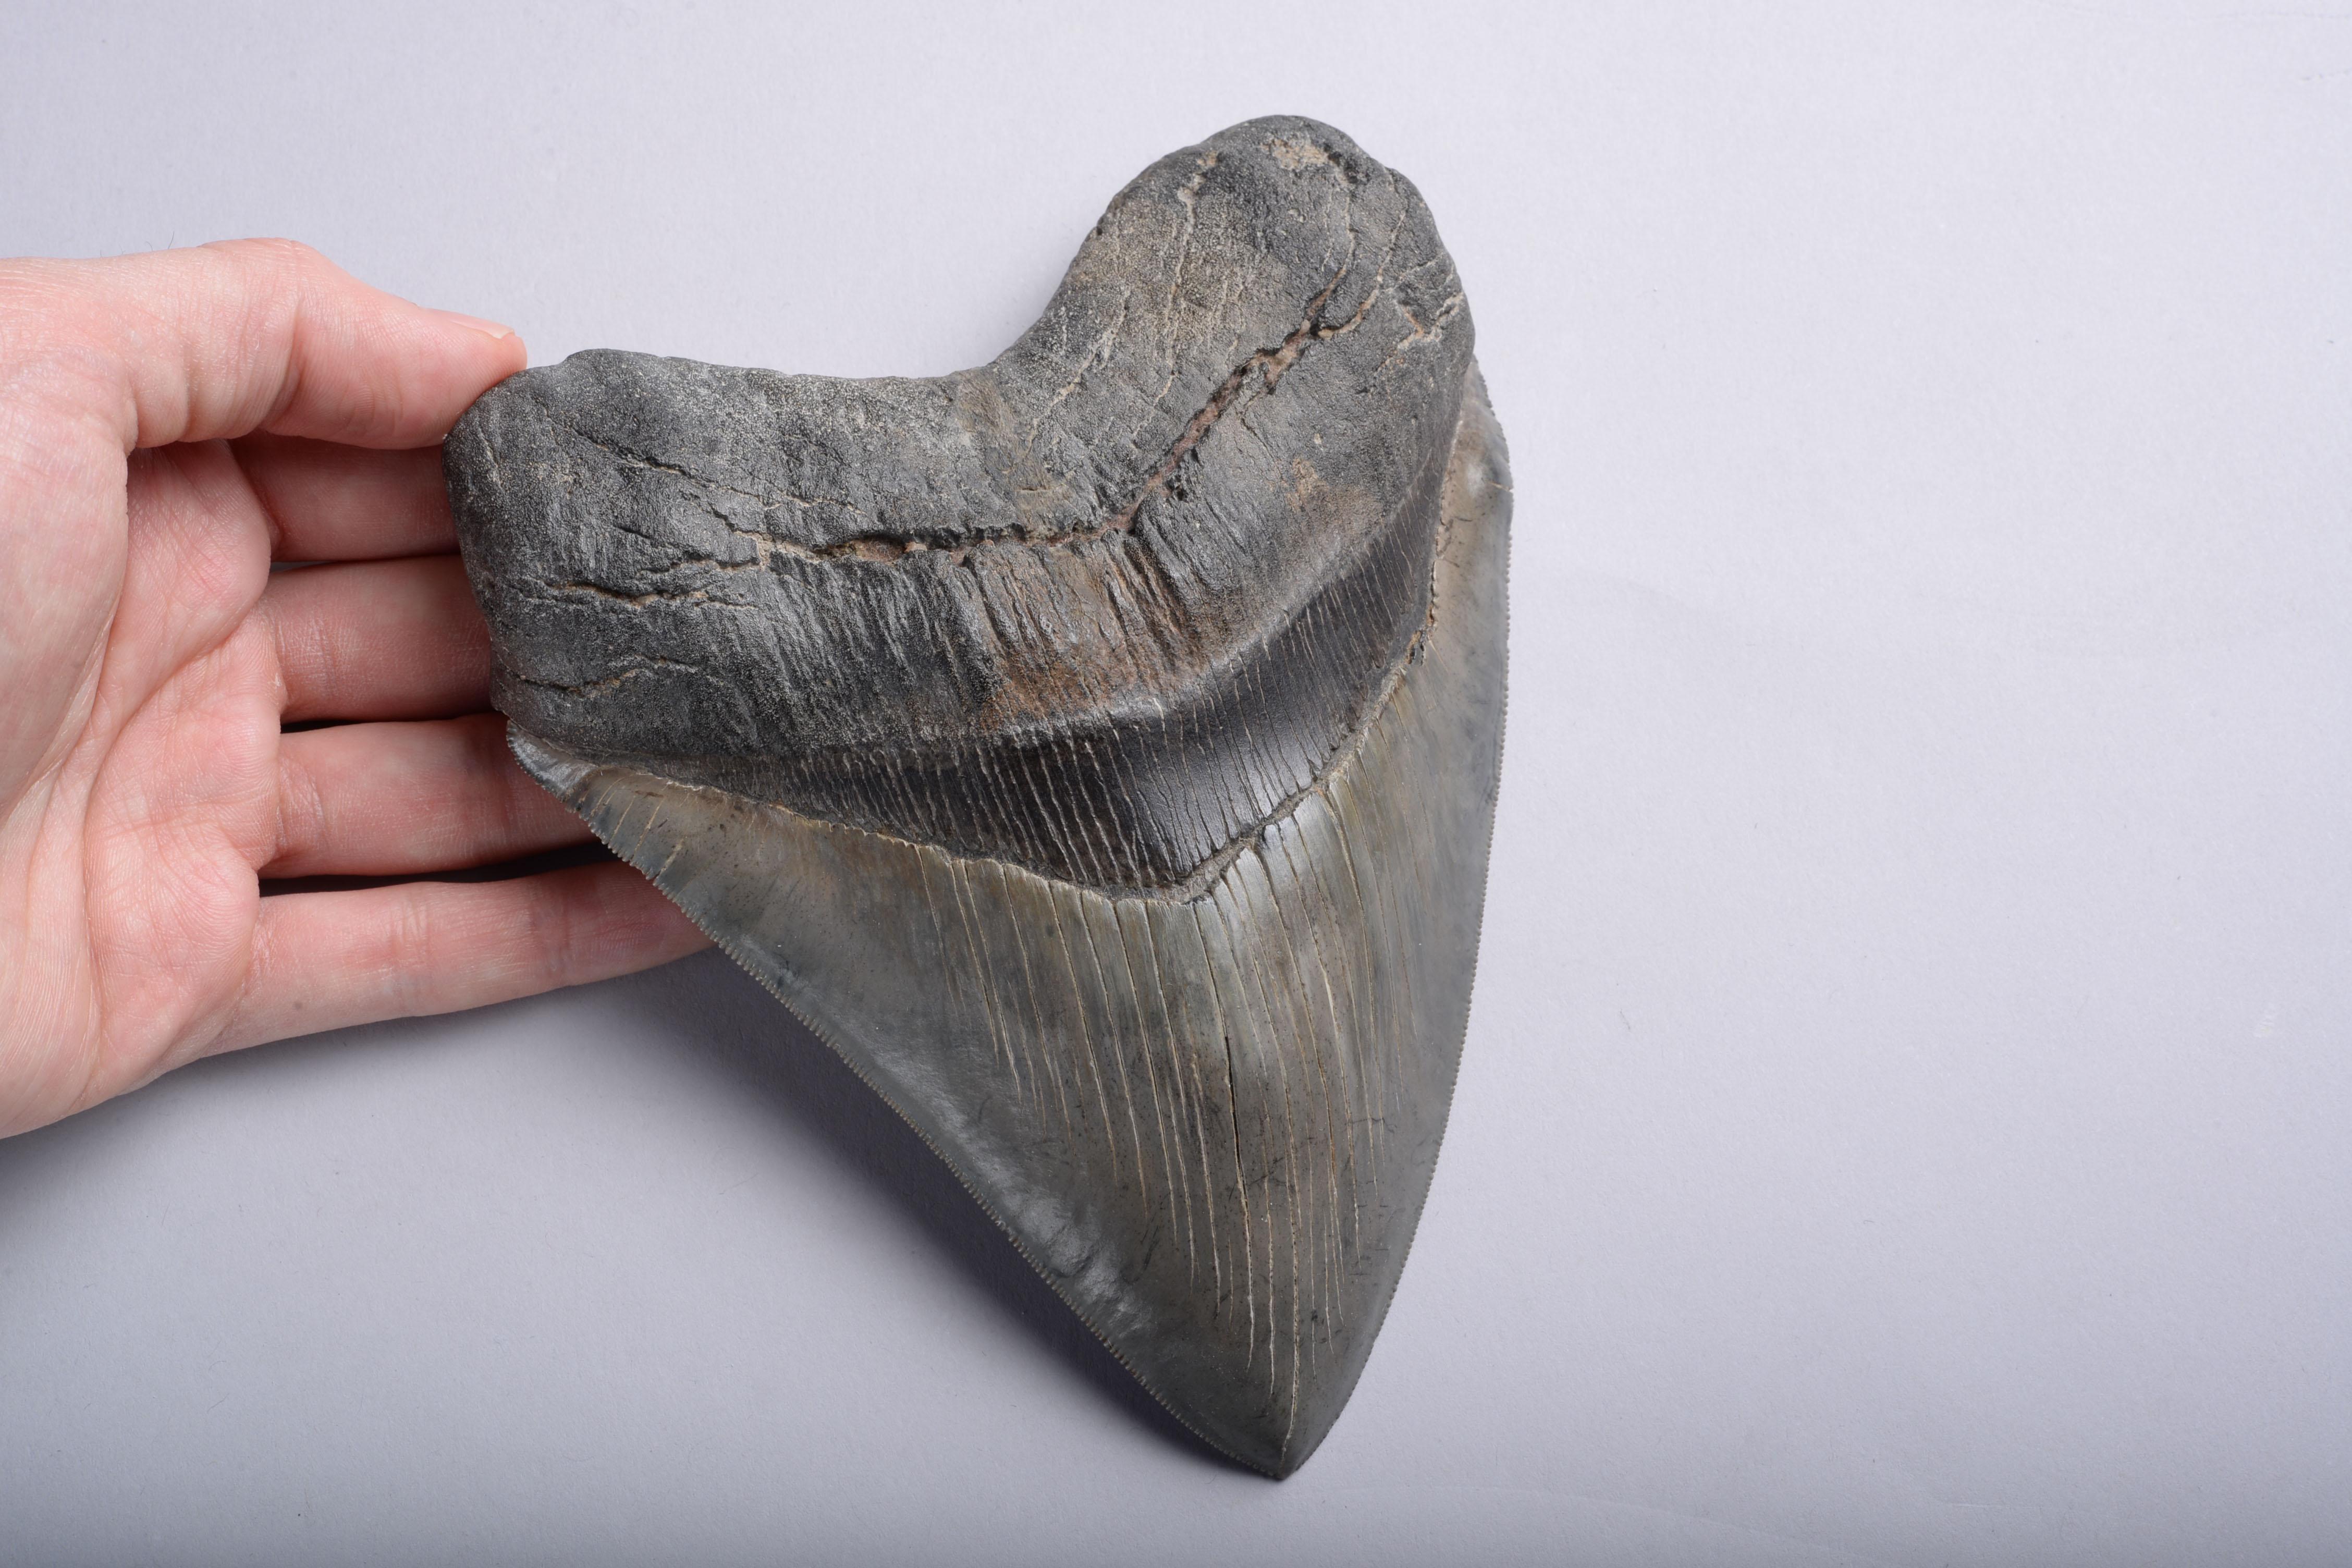 A huge, 6 1/2 inch Megalodon (Carcharocles megalodon) shark tooth, dating to 25 – 2 million years before the present day. 

It's hard to comprehend that this enormous serrated tooth once belonged to a living creature. Yet this beautiful fossil